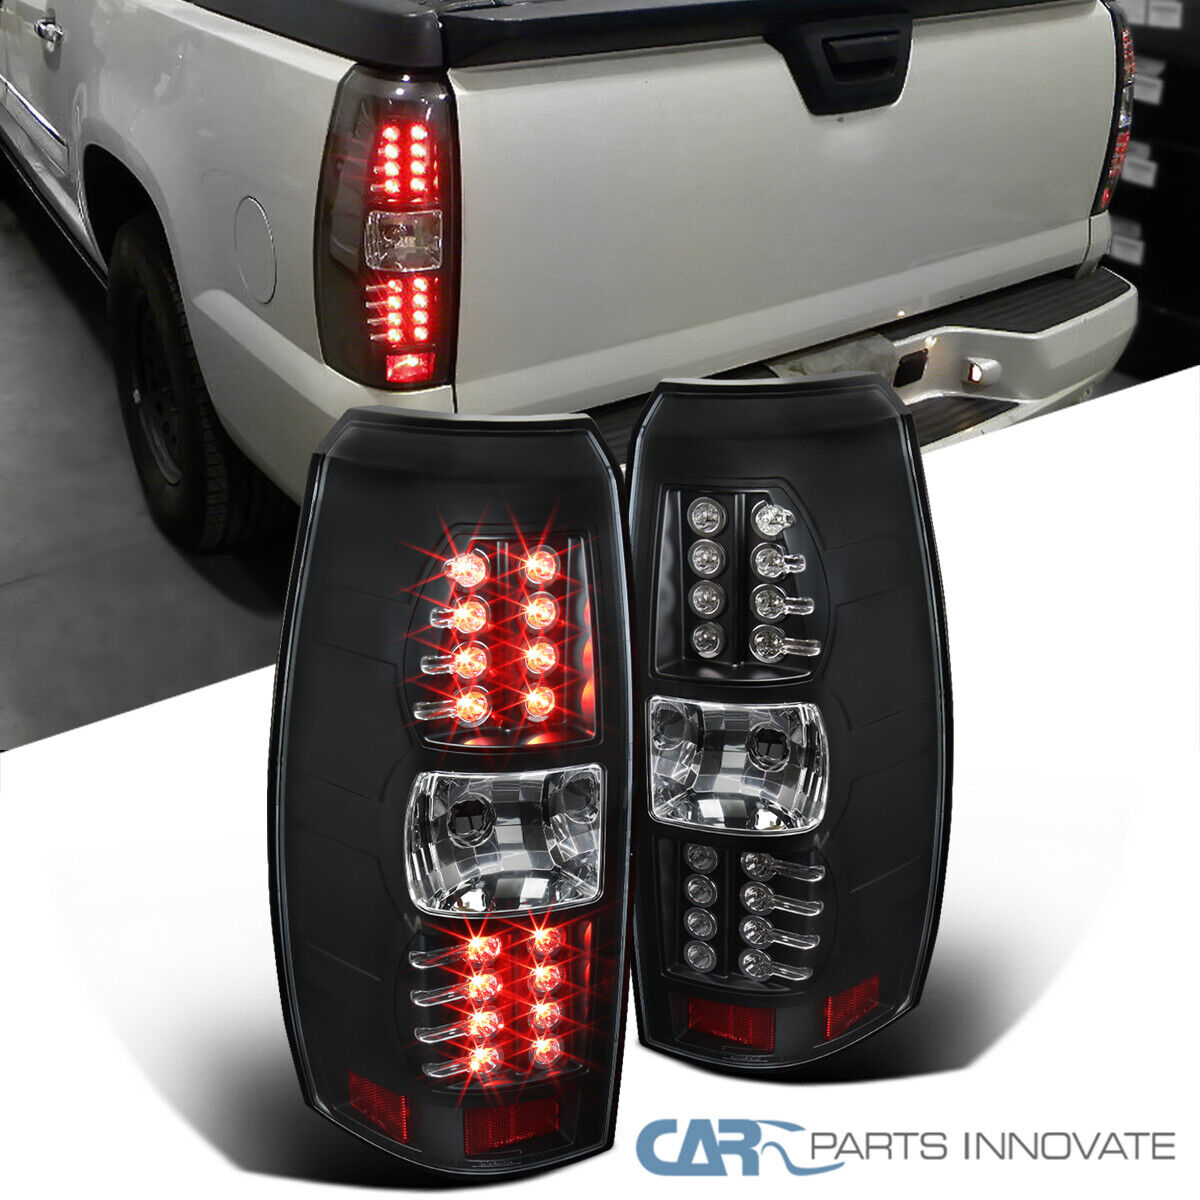 <LED Tail Lights> Fits 07-12 Chevy Avalanche Black Brake Signal Lamps Clear Lens